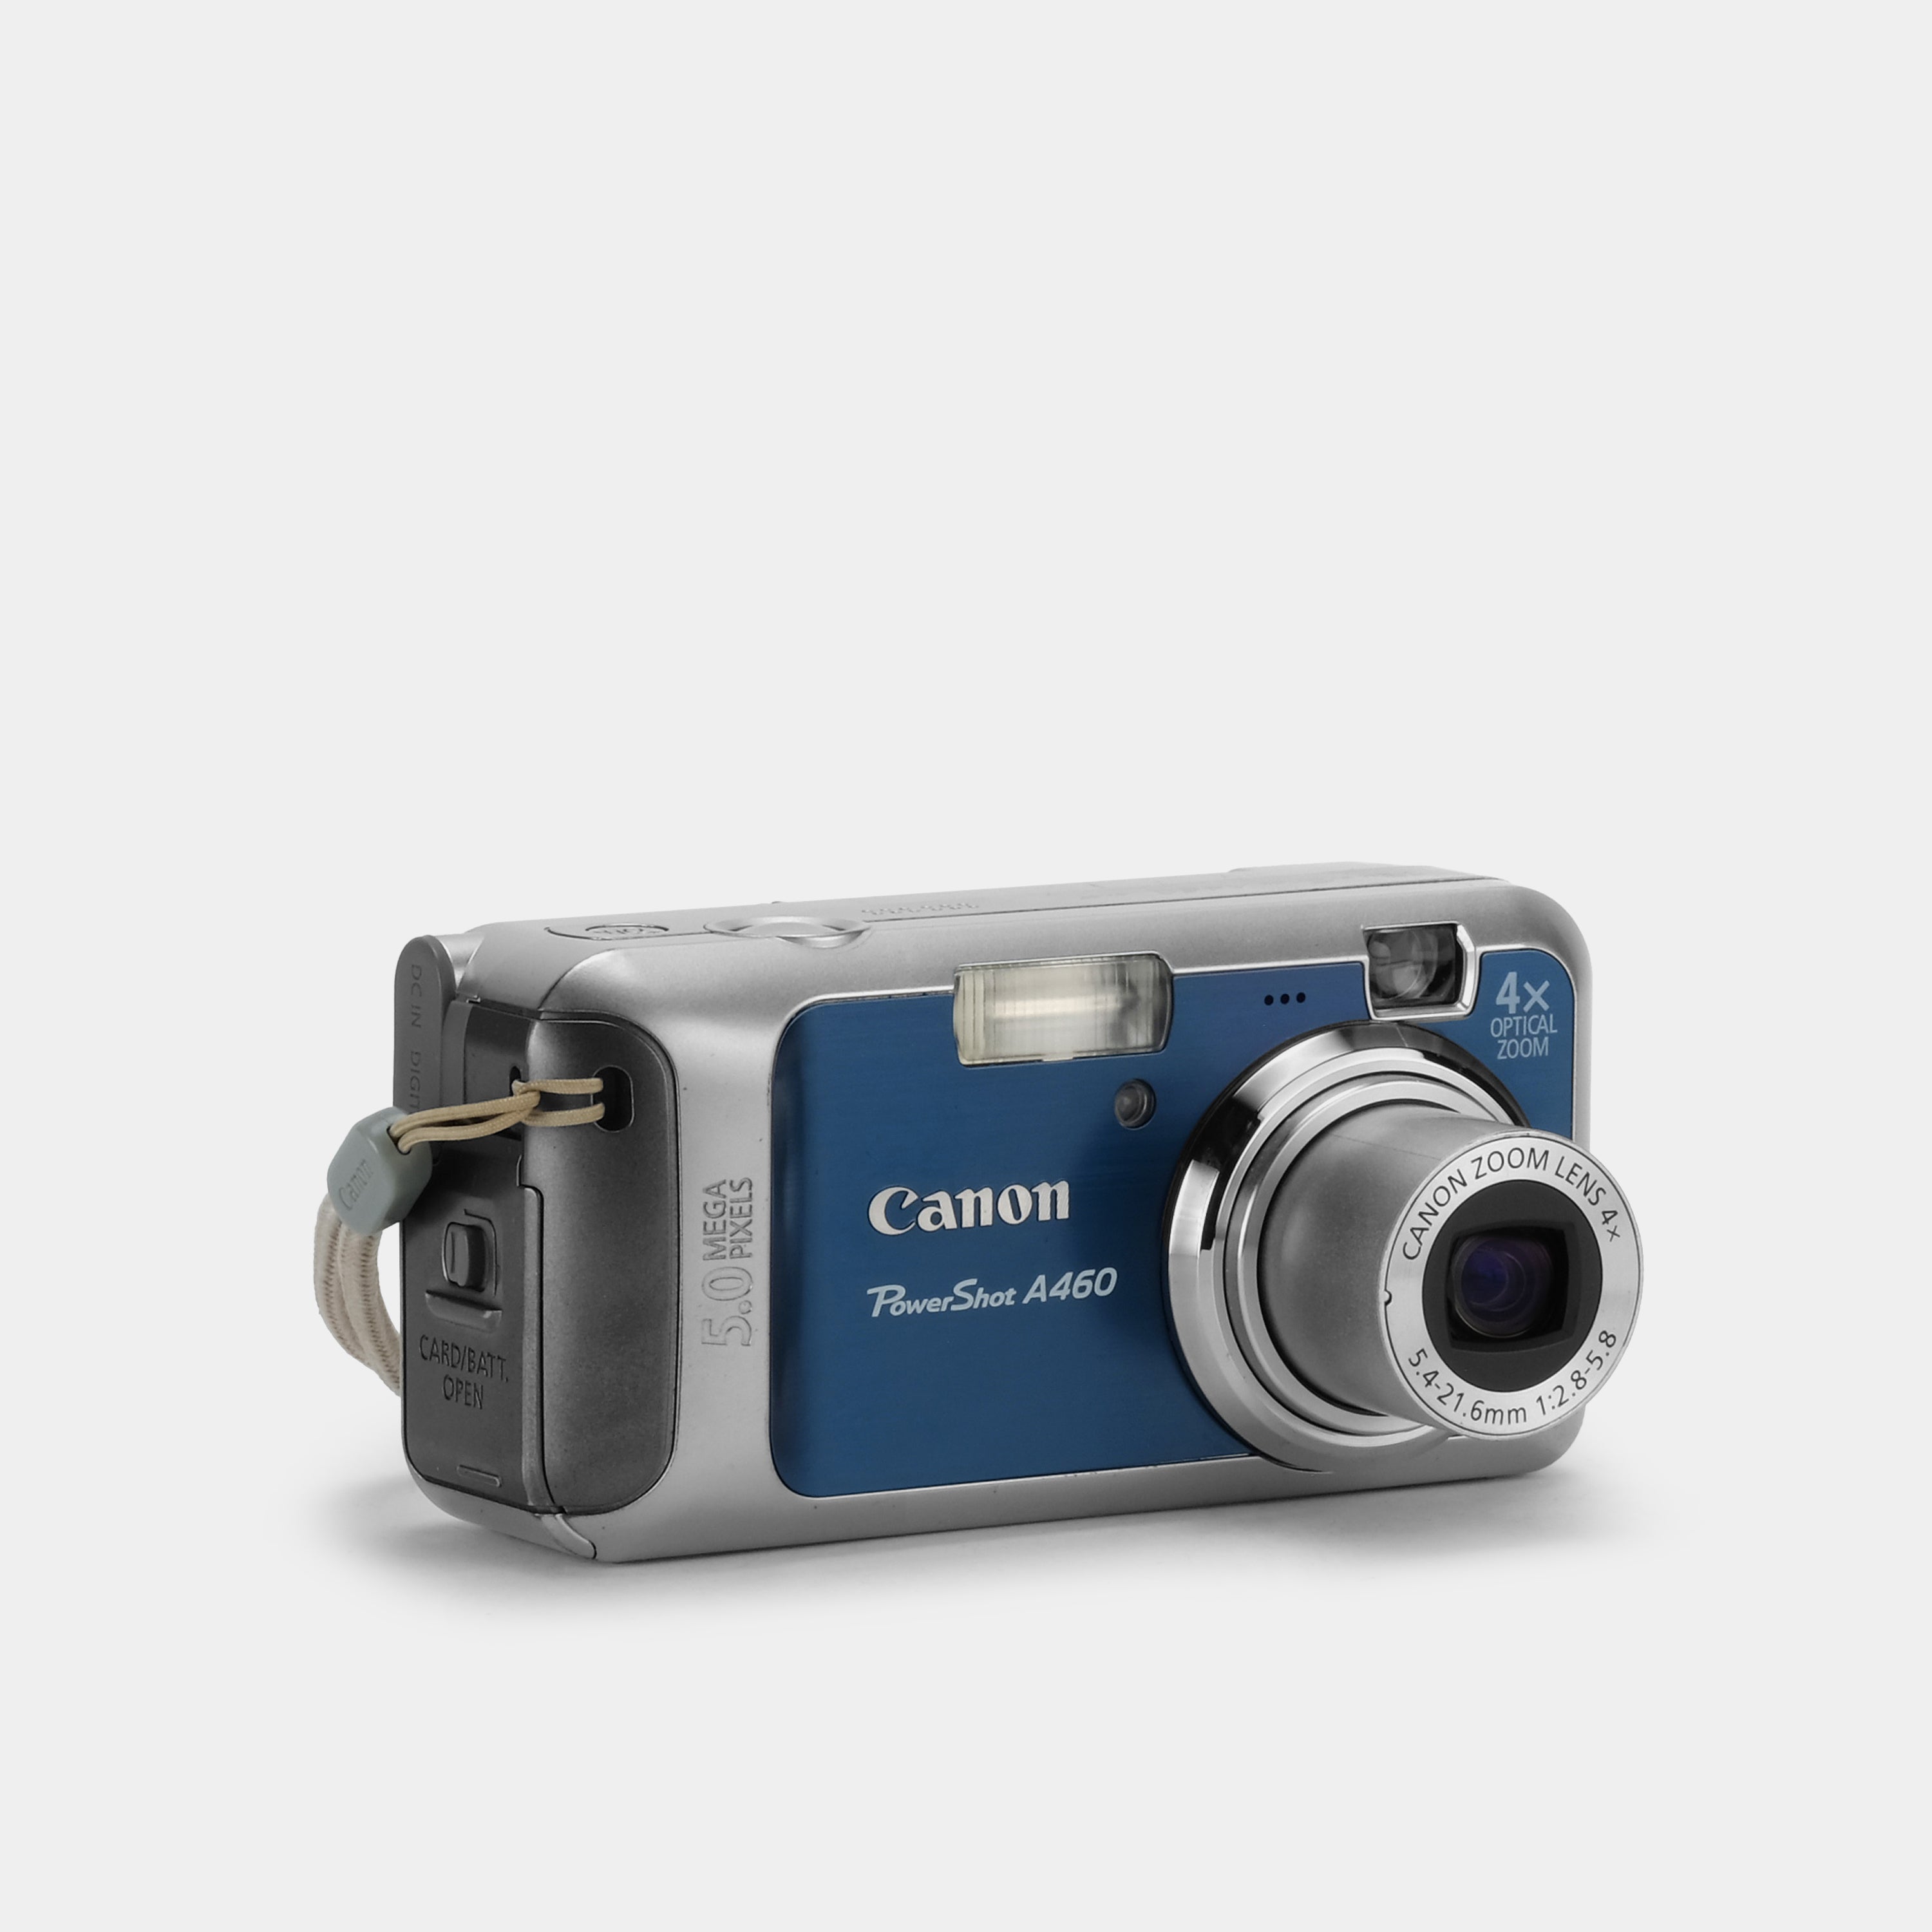 Canon PowerShot A460 Digital Point and Shoot Camera